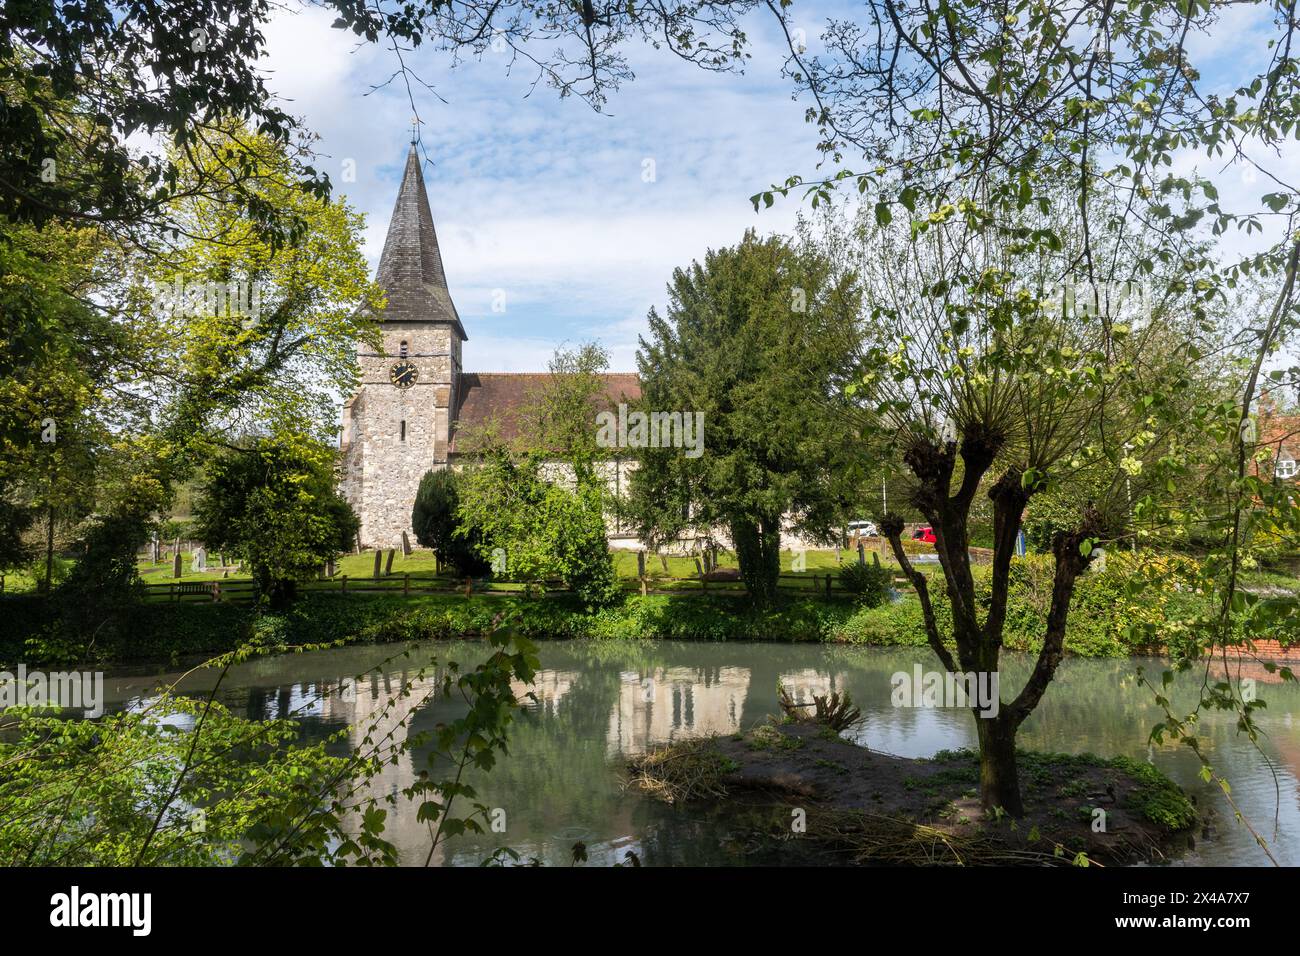 View of Holy Rood Church and village pond in Holybourne, Hampshire, England, UK Stock Photo